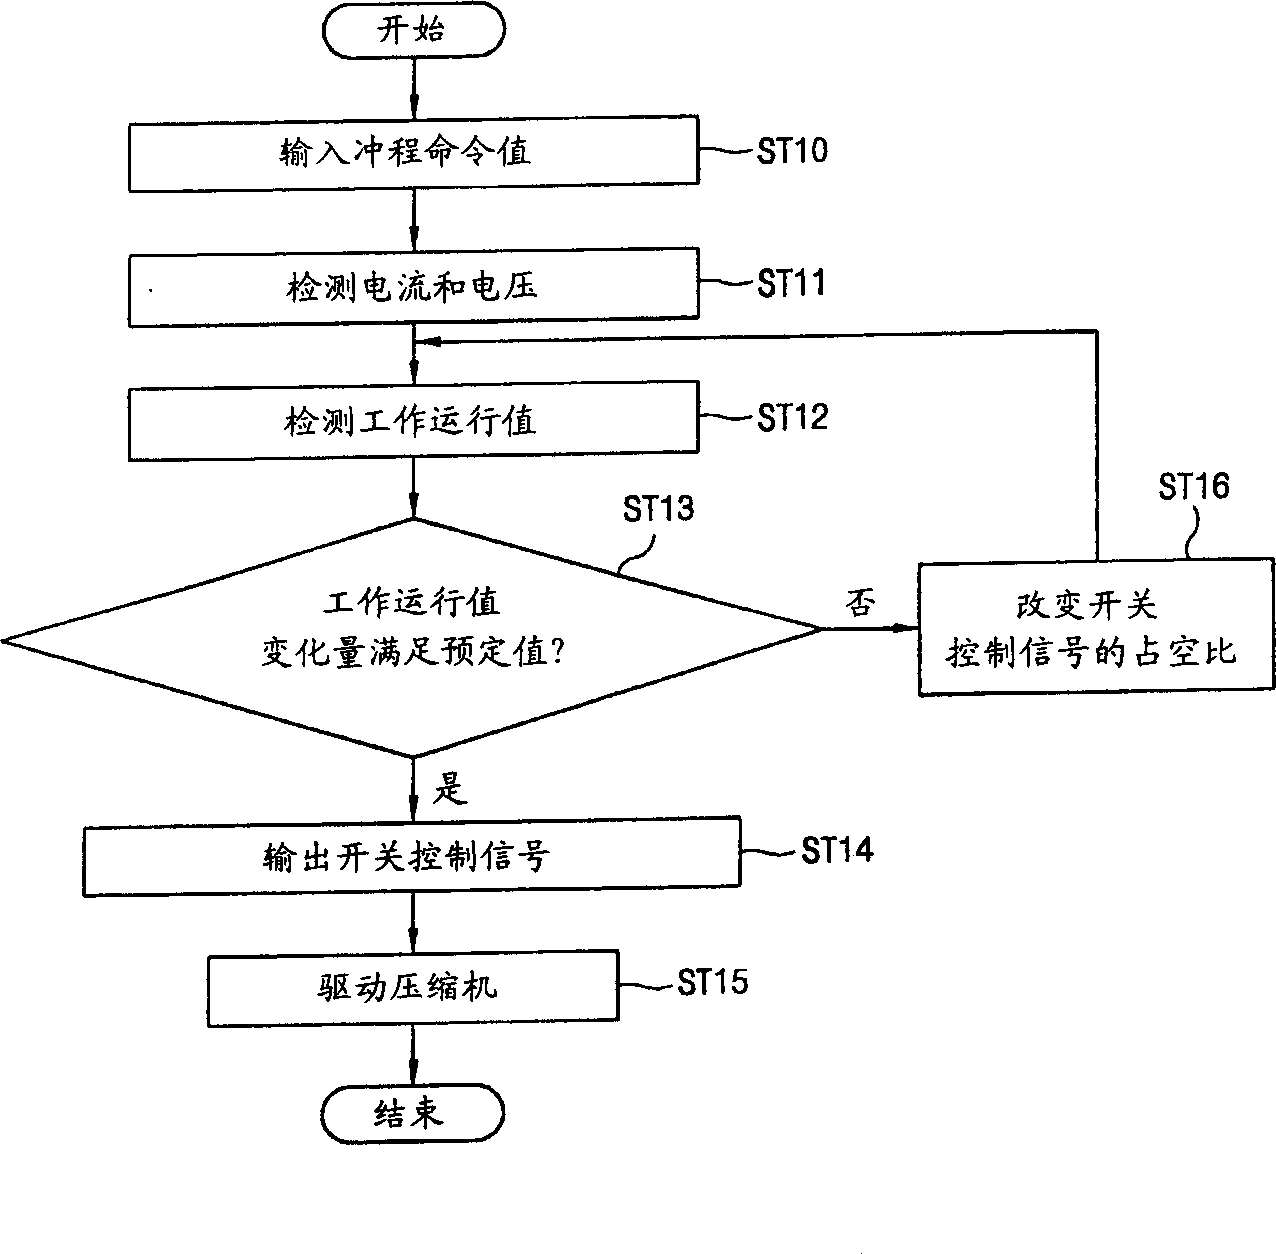 Equipment and method for controlling operation of linear compressor